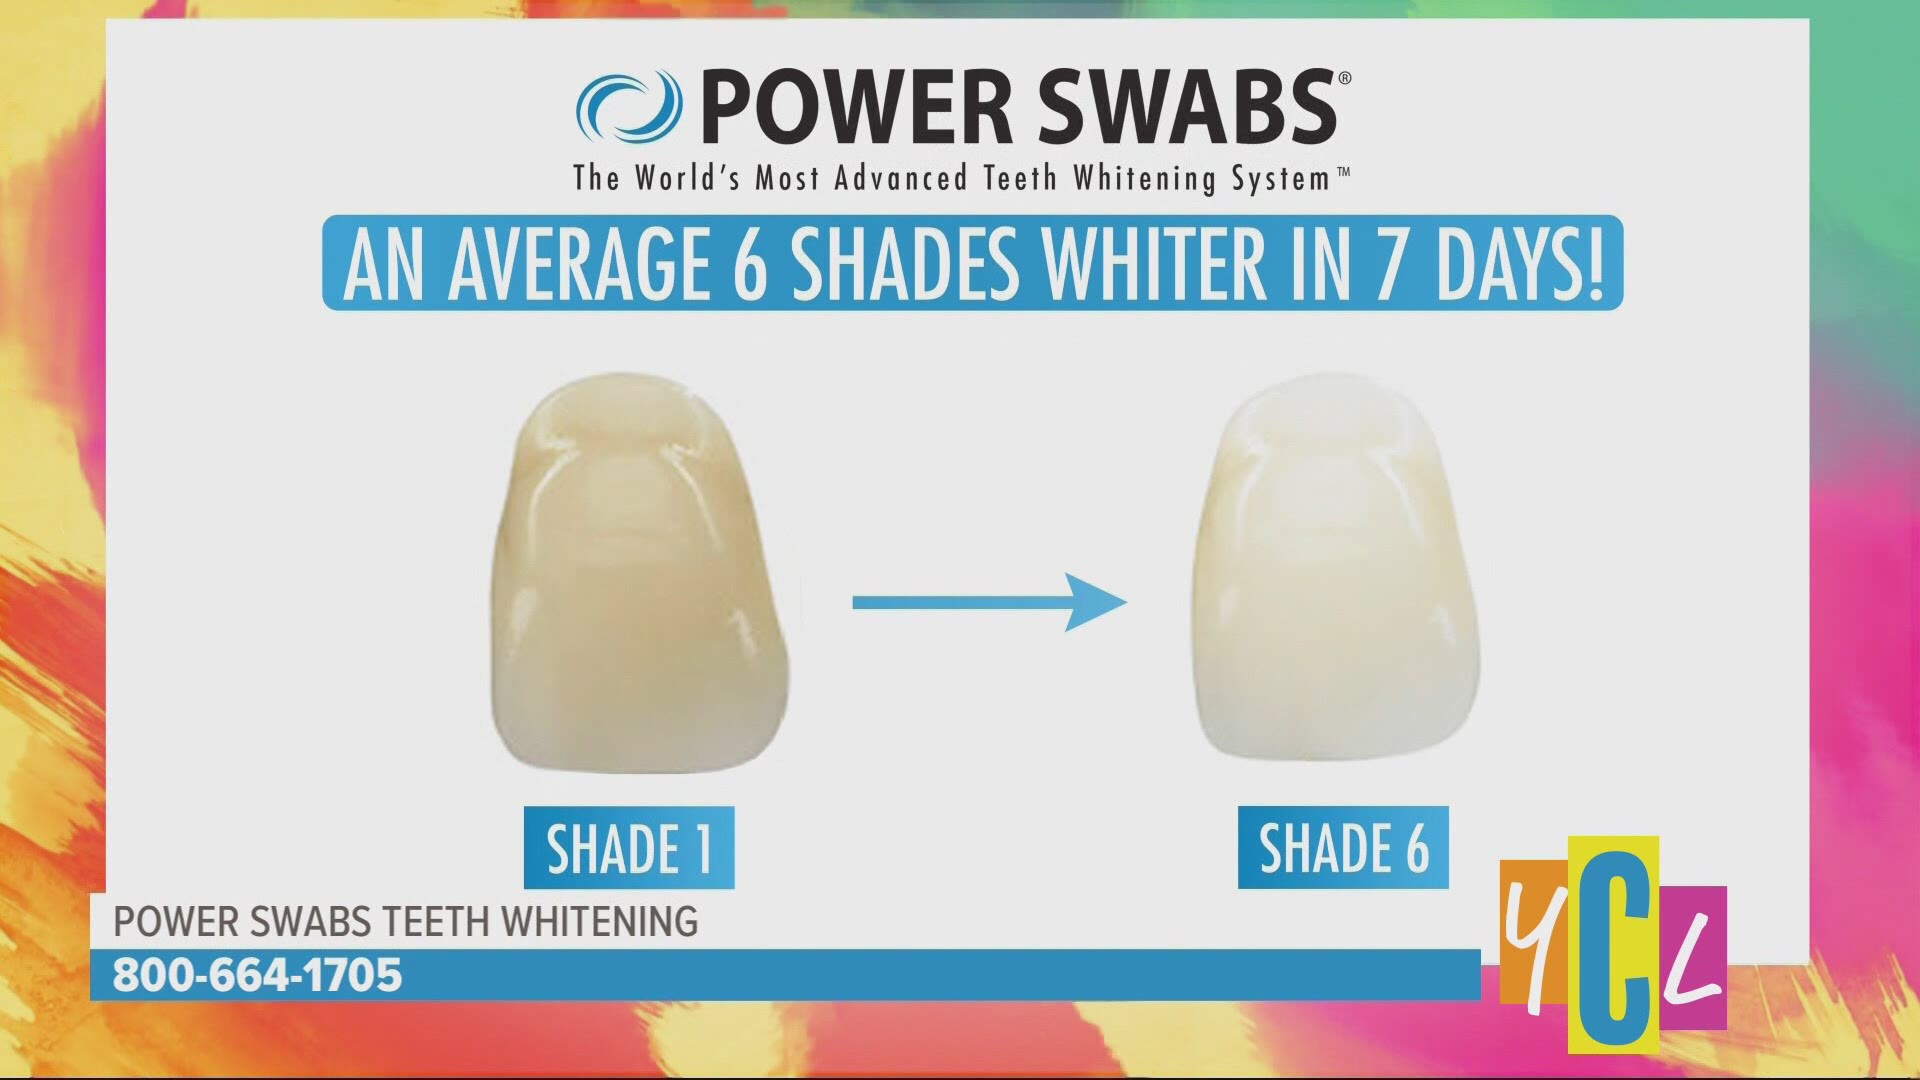 Achieve a brighter, whiter smile with Powerswabs. This segment paid for by True Earth Health Solutions.